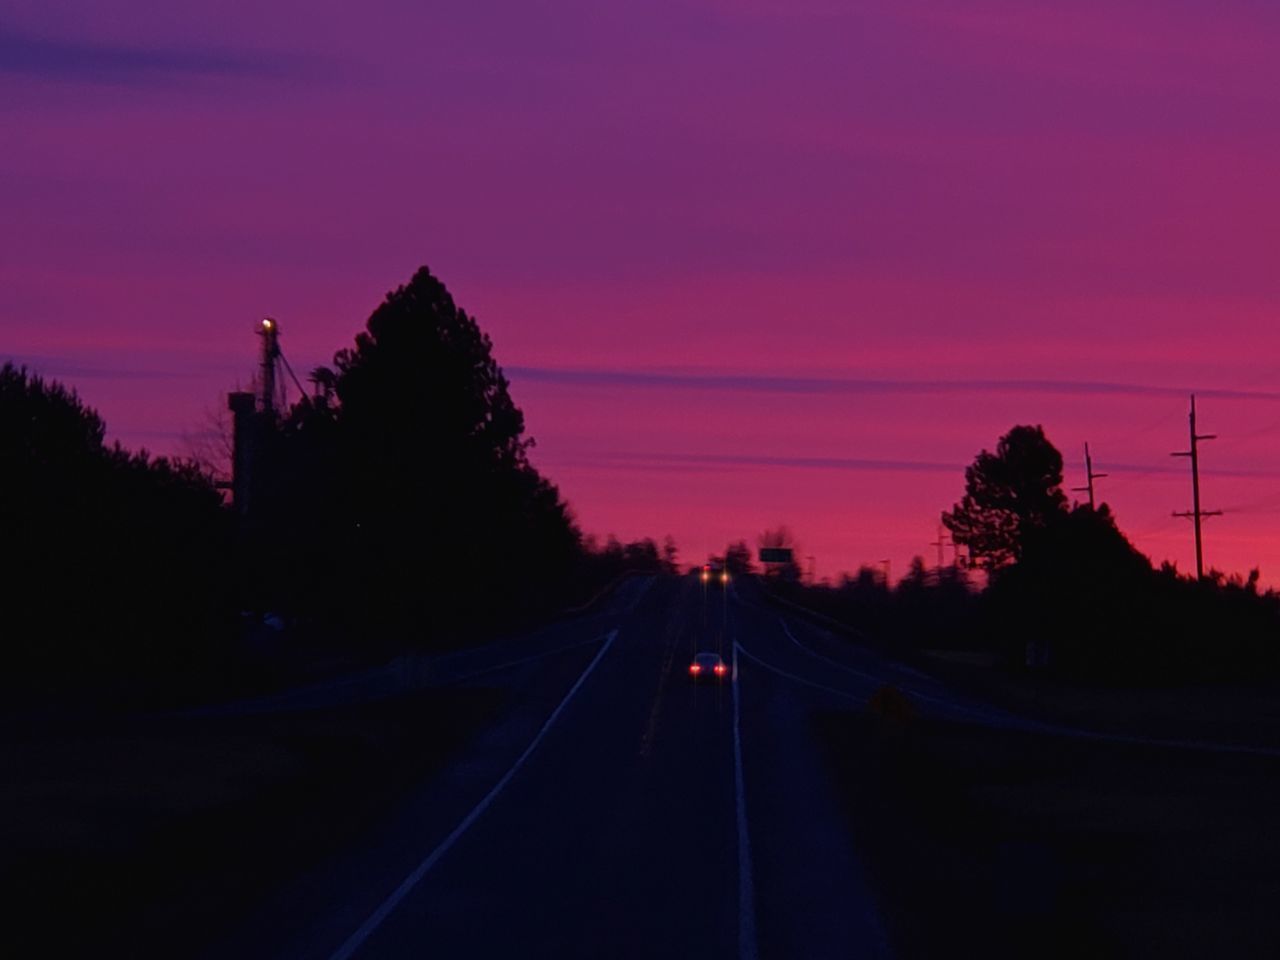 ROAD AMIDST SILHOUETTE TREES AGAINST SKY DURING SUNSET